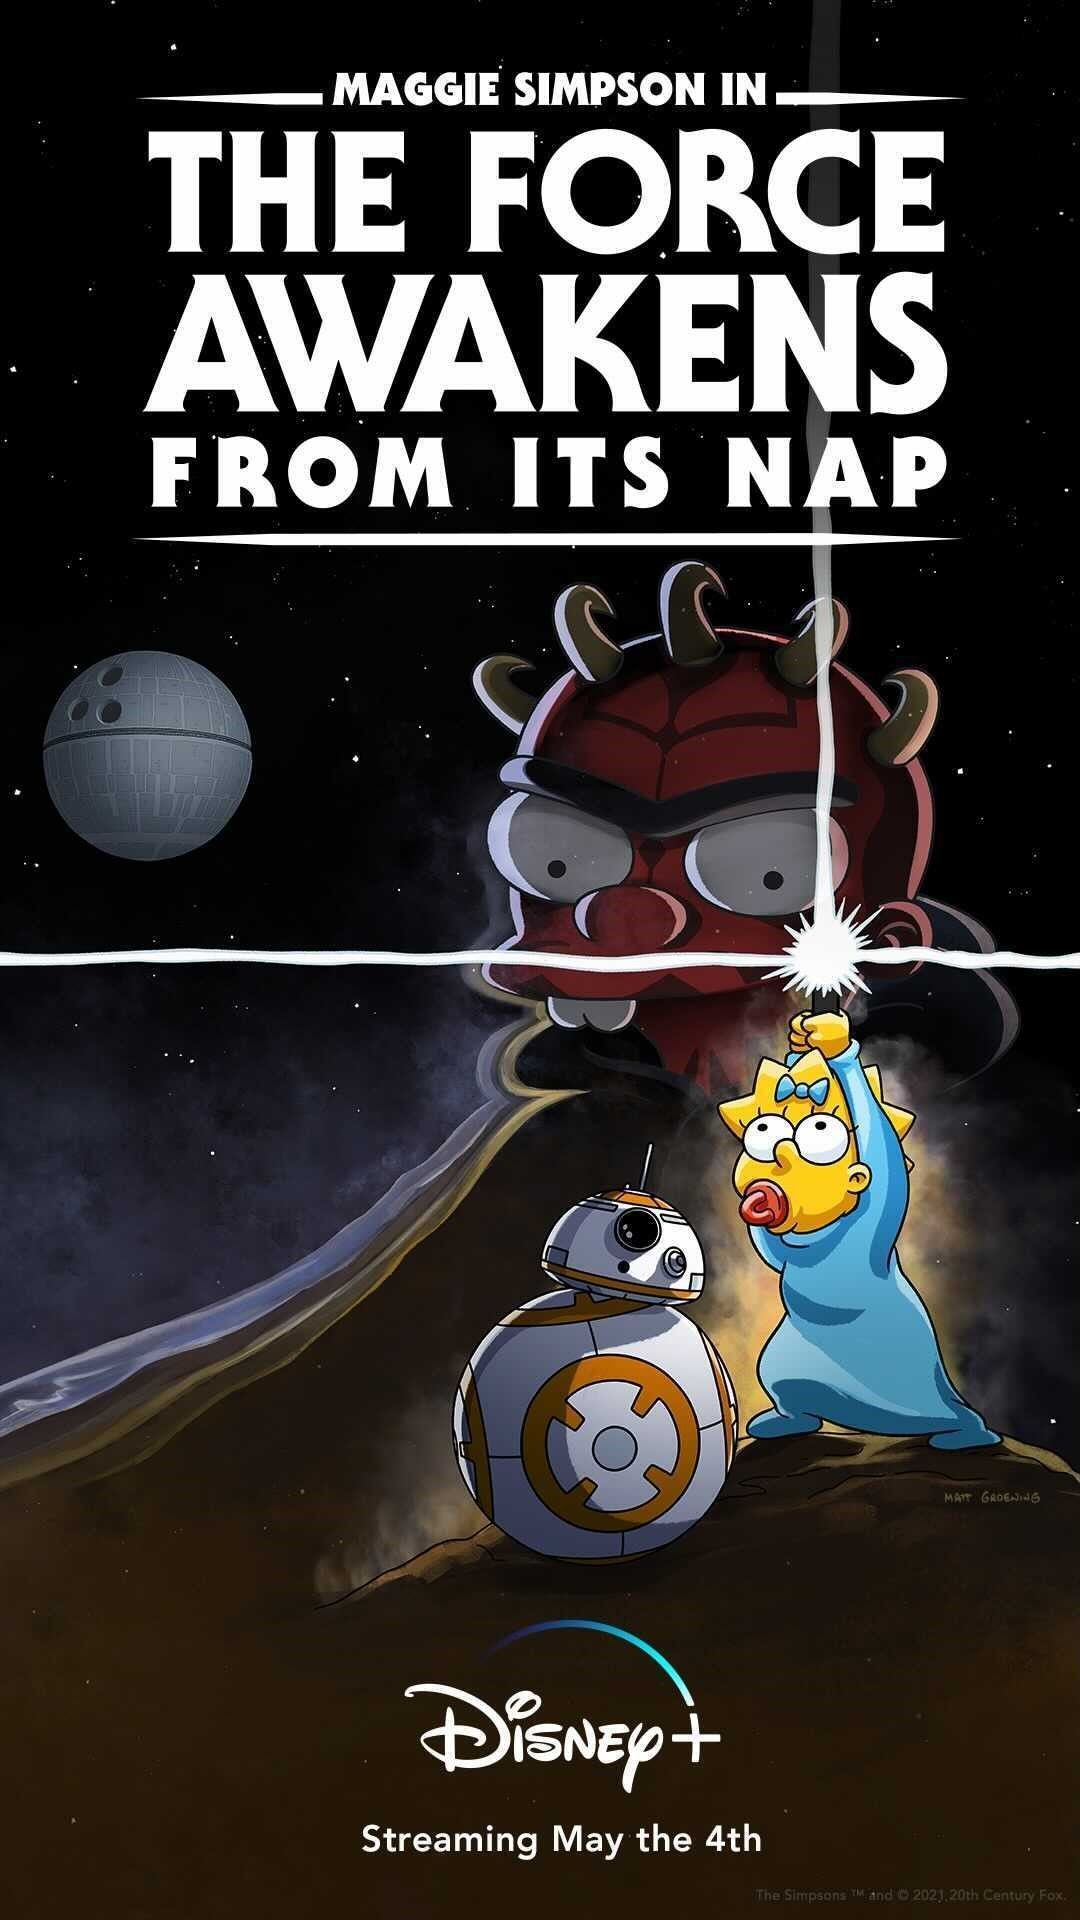 Star Wars và The Simpsons Collide in New Disney + Short